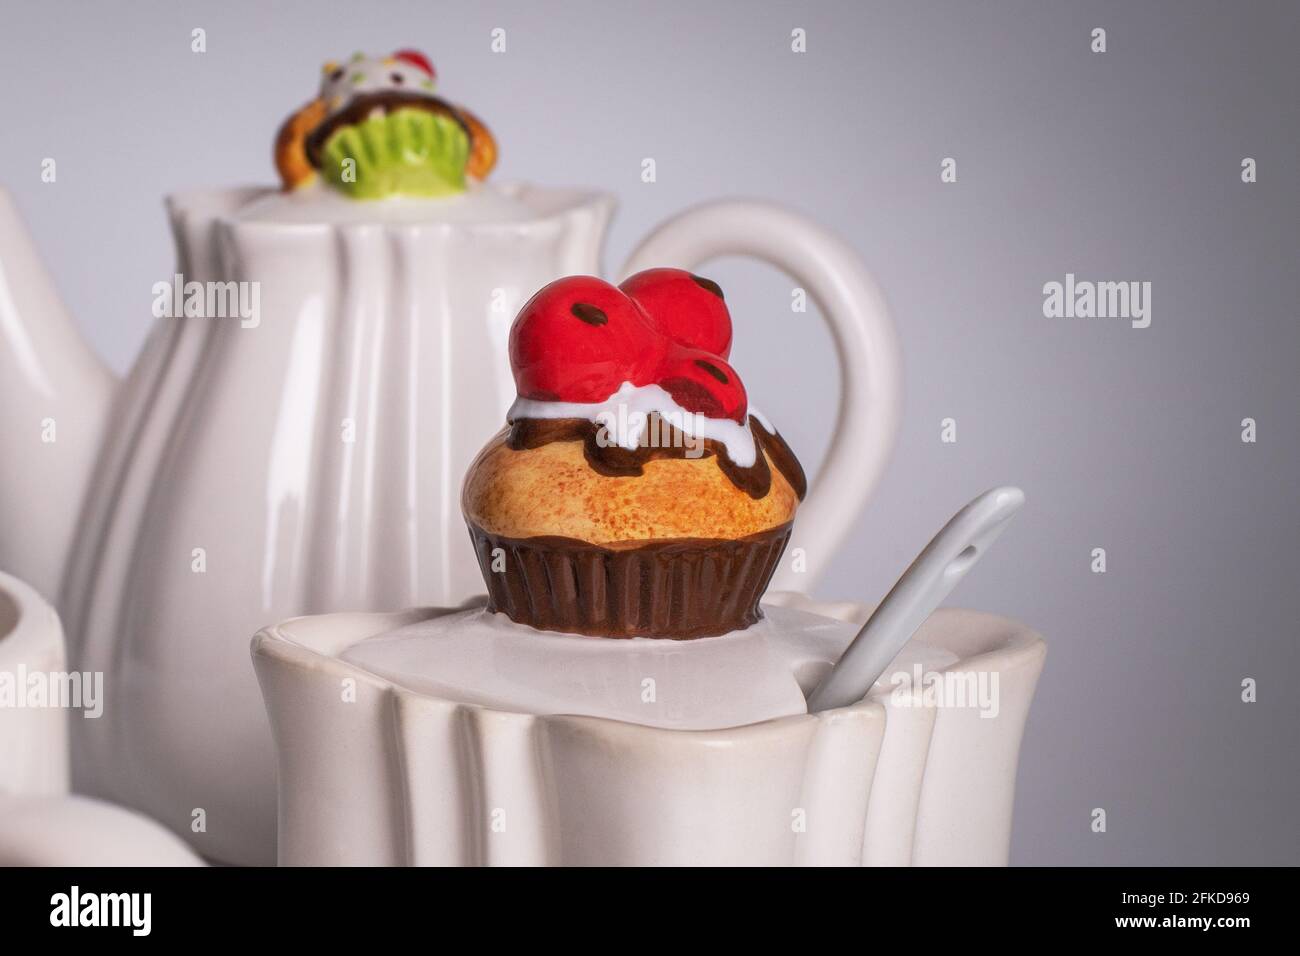 Decorative sugar bowl with muffin-shaped lid. Unusual dishes. White ceramic tableware Stock Photo